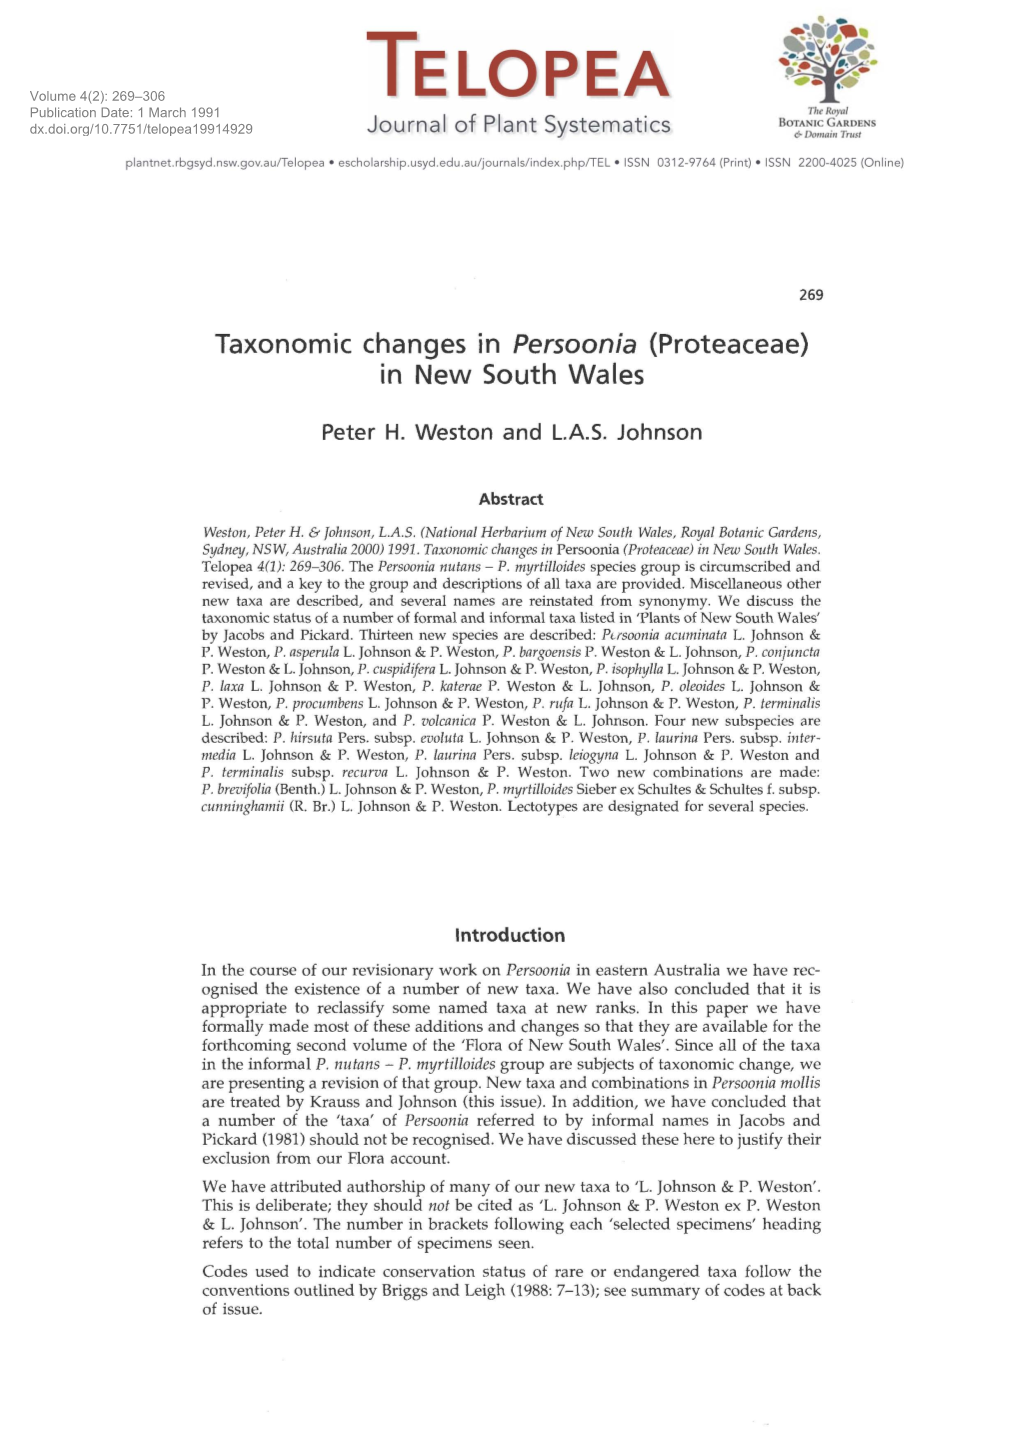 Taxonomic Changes in Persoonia (Proteaceae) in New South Wales